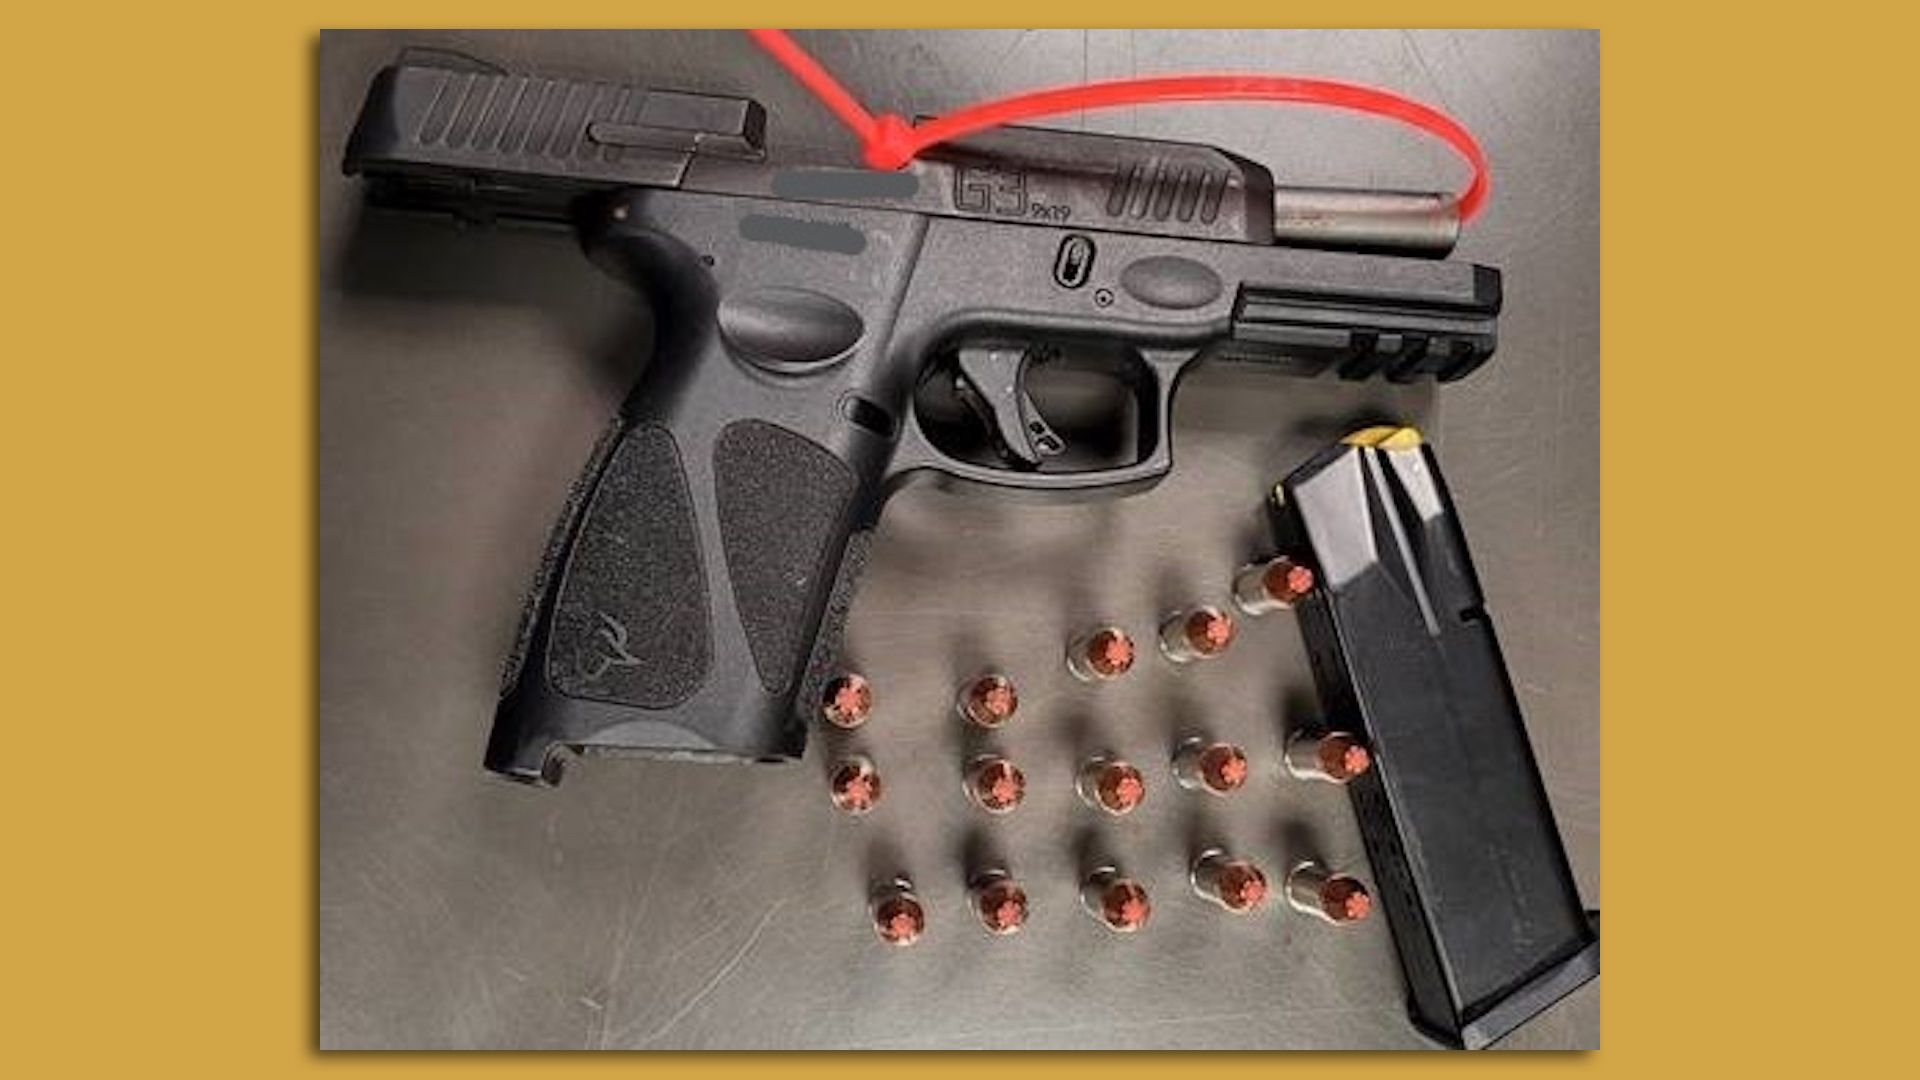 Image of a gun confiscated at Austin-Bergstrom International Airport